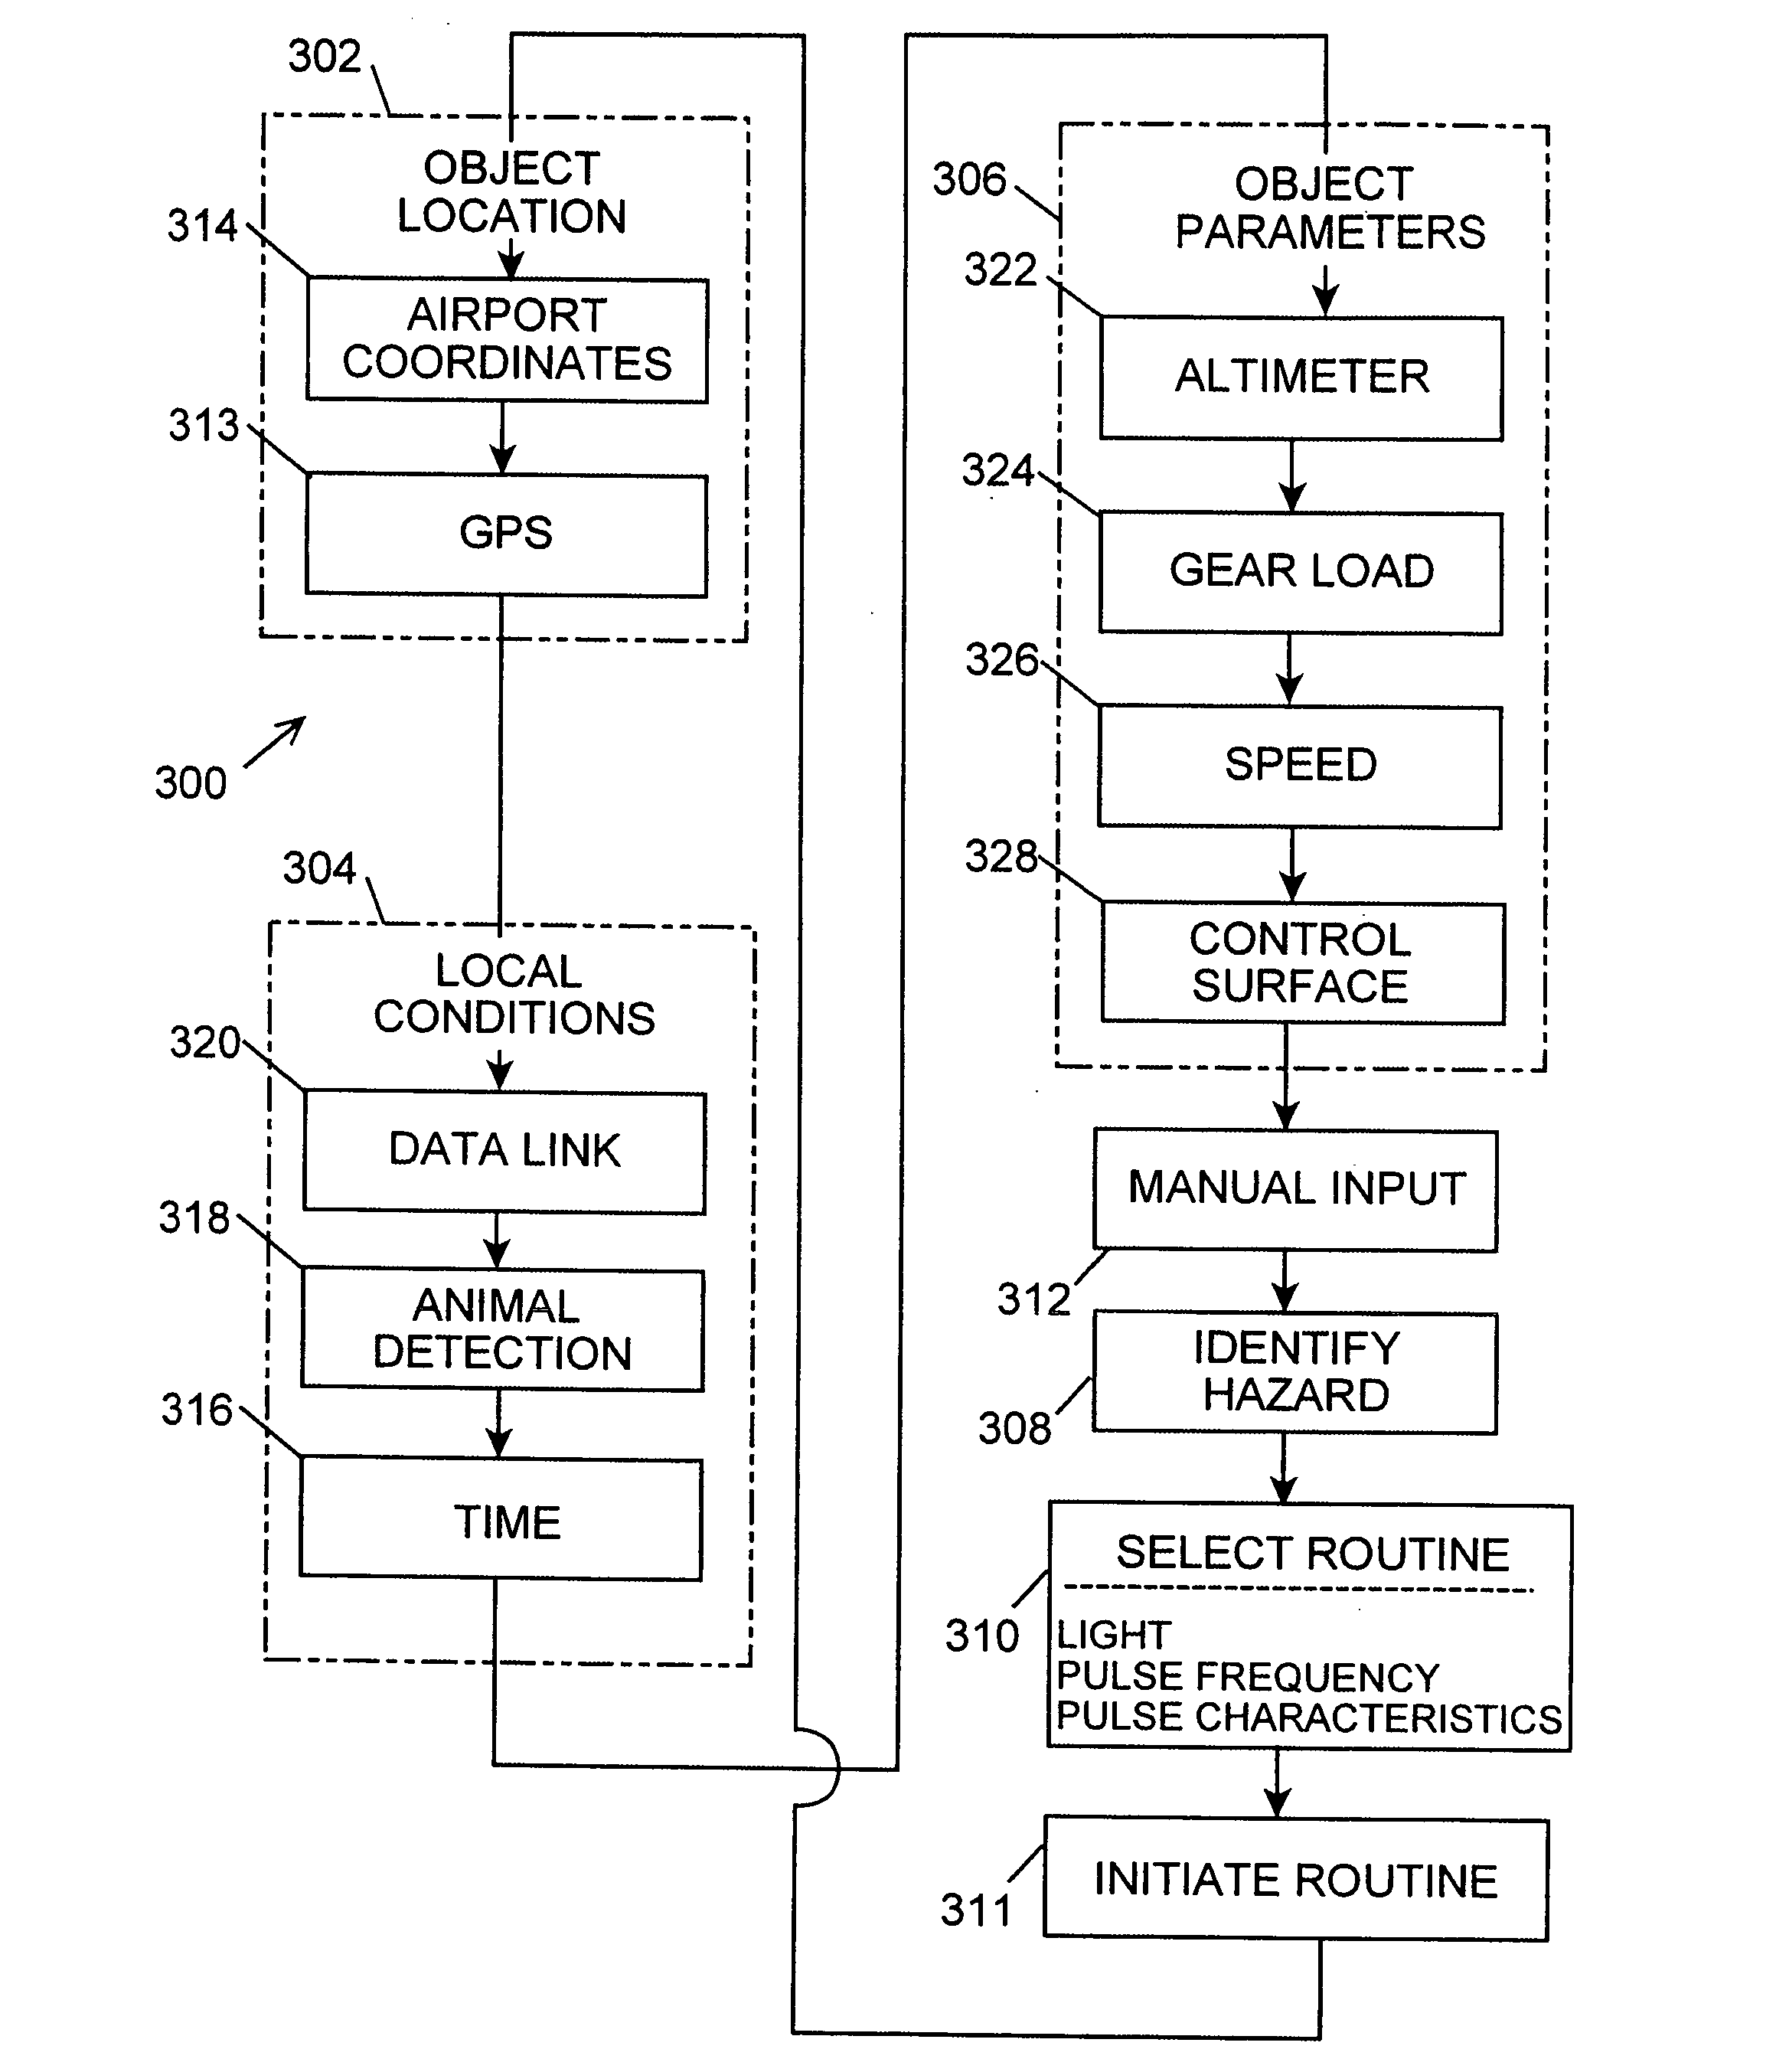 System for controlling the interaction of animals and objects